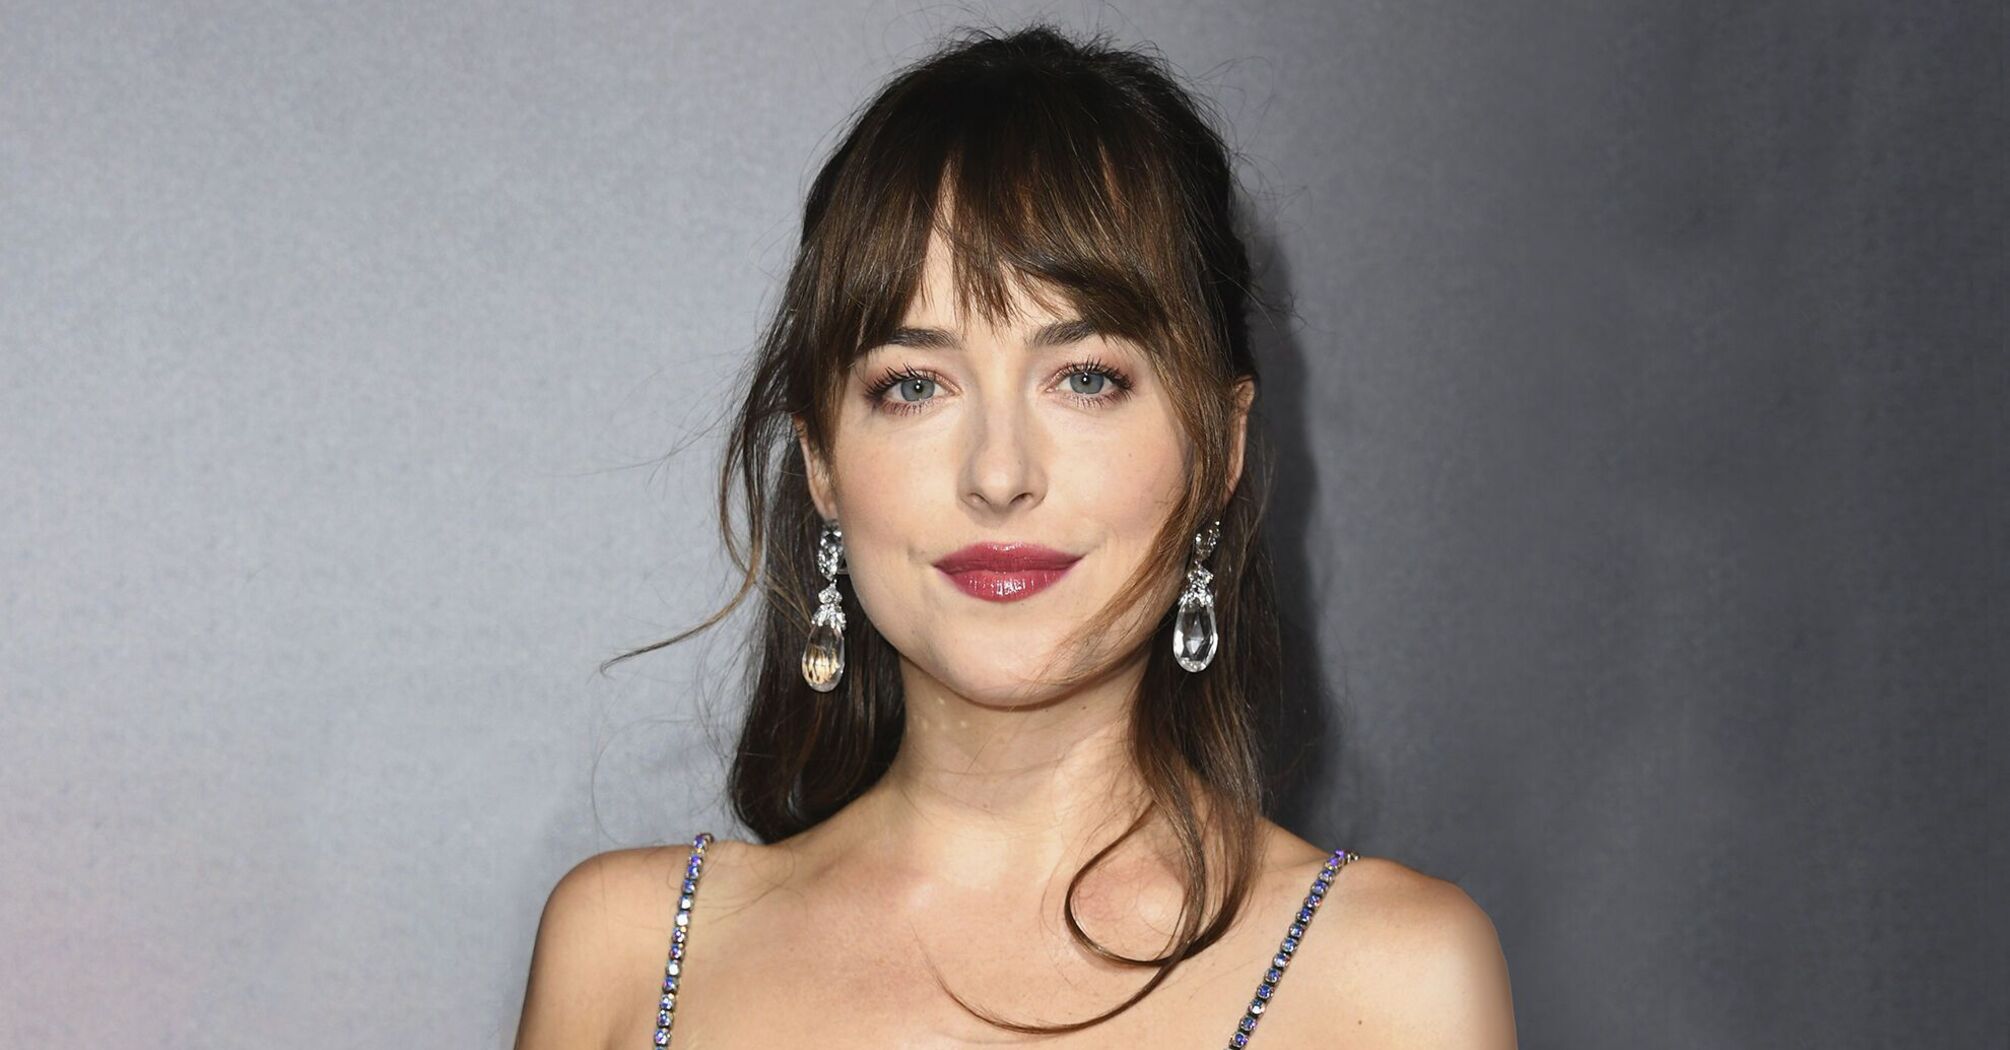 Dakota Johnson is getting married for the first time